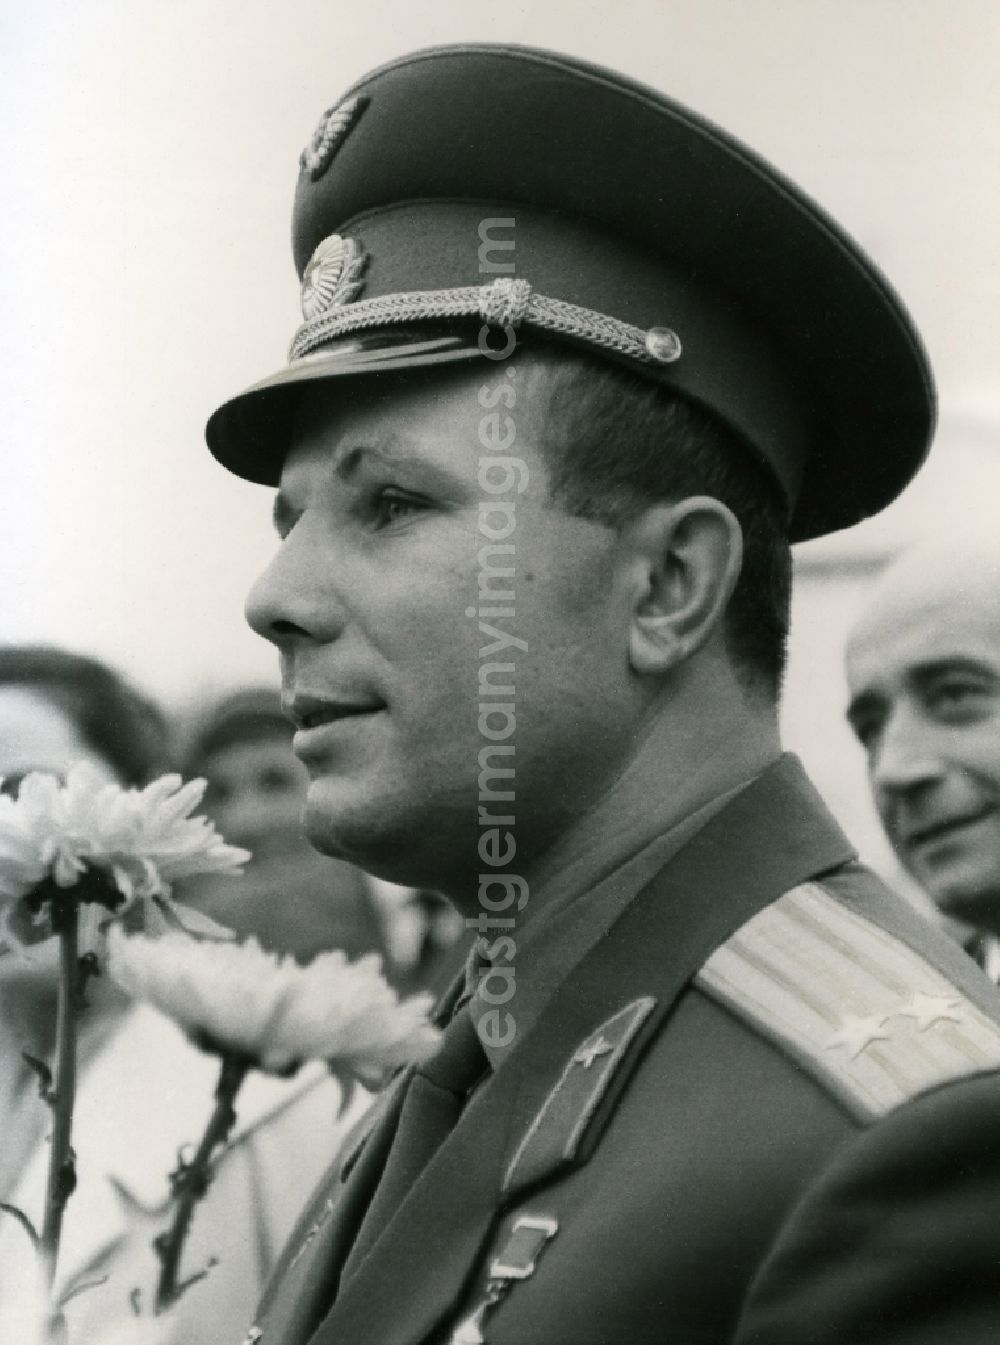 GDR image archive: Berlin - The first man in space Yuri Gagarin (1934 - 1968) in Berlin. He was a pilot from the spaceship Vostok 1